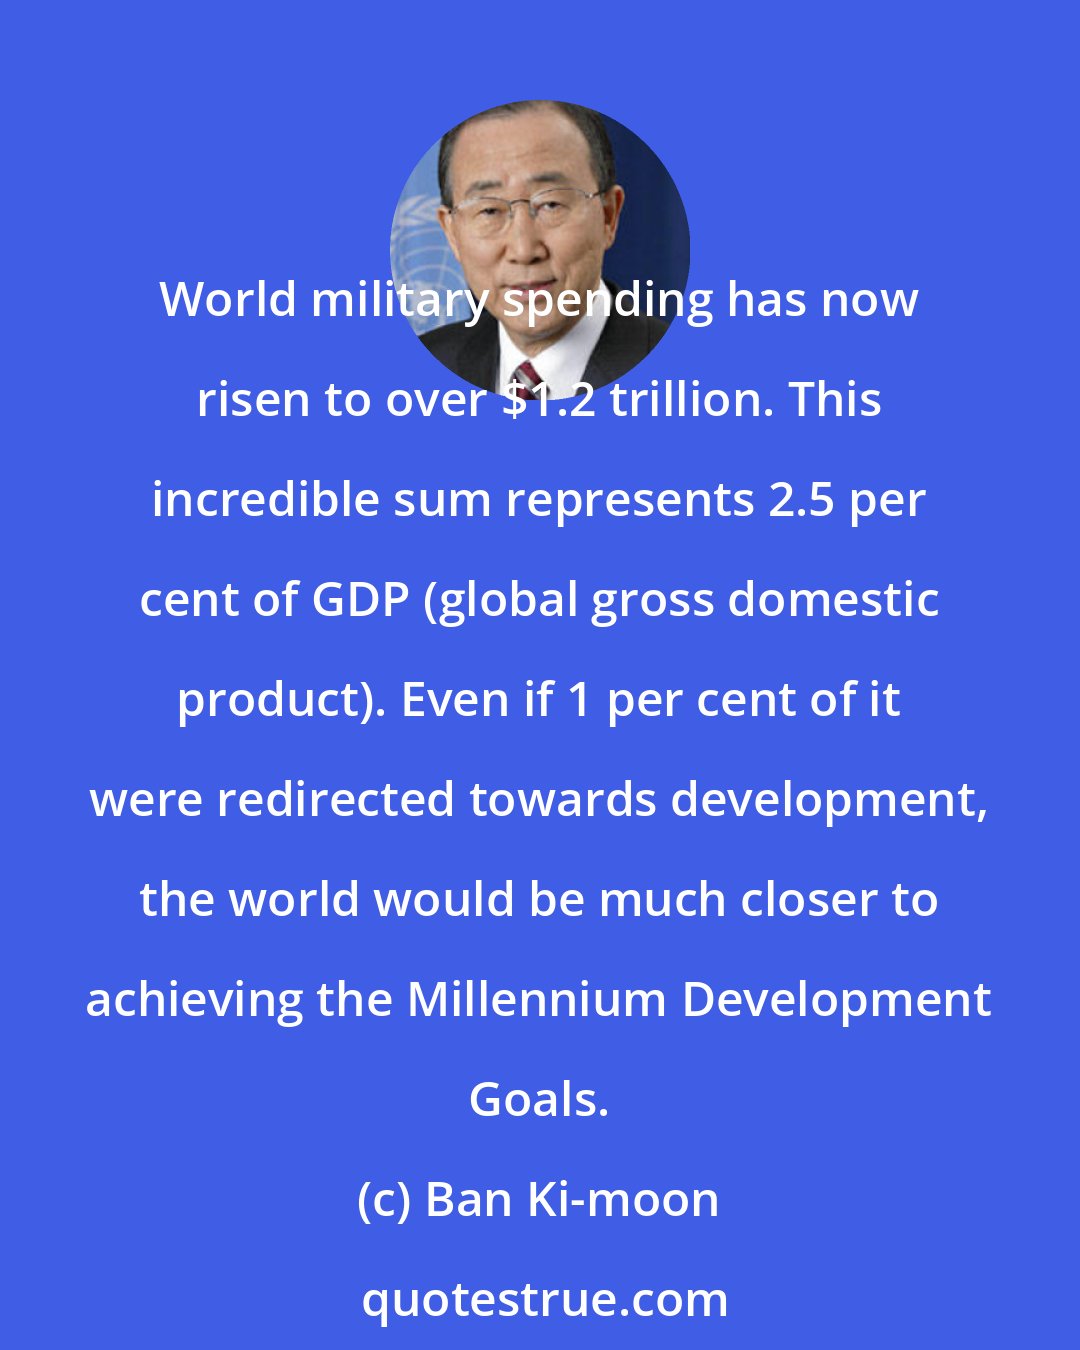 Ban Ki-moon: World military spending has now risen to over $1.2 trillion. This incredible sum represents 2.5 per cent of GDP (global gross domestic product). Even if 1 per cent of it were redirected towards development, the world would be much closer to achieving the Millennium Development Goals.